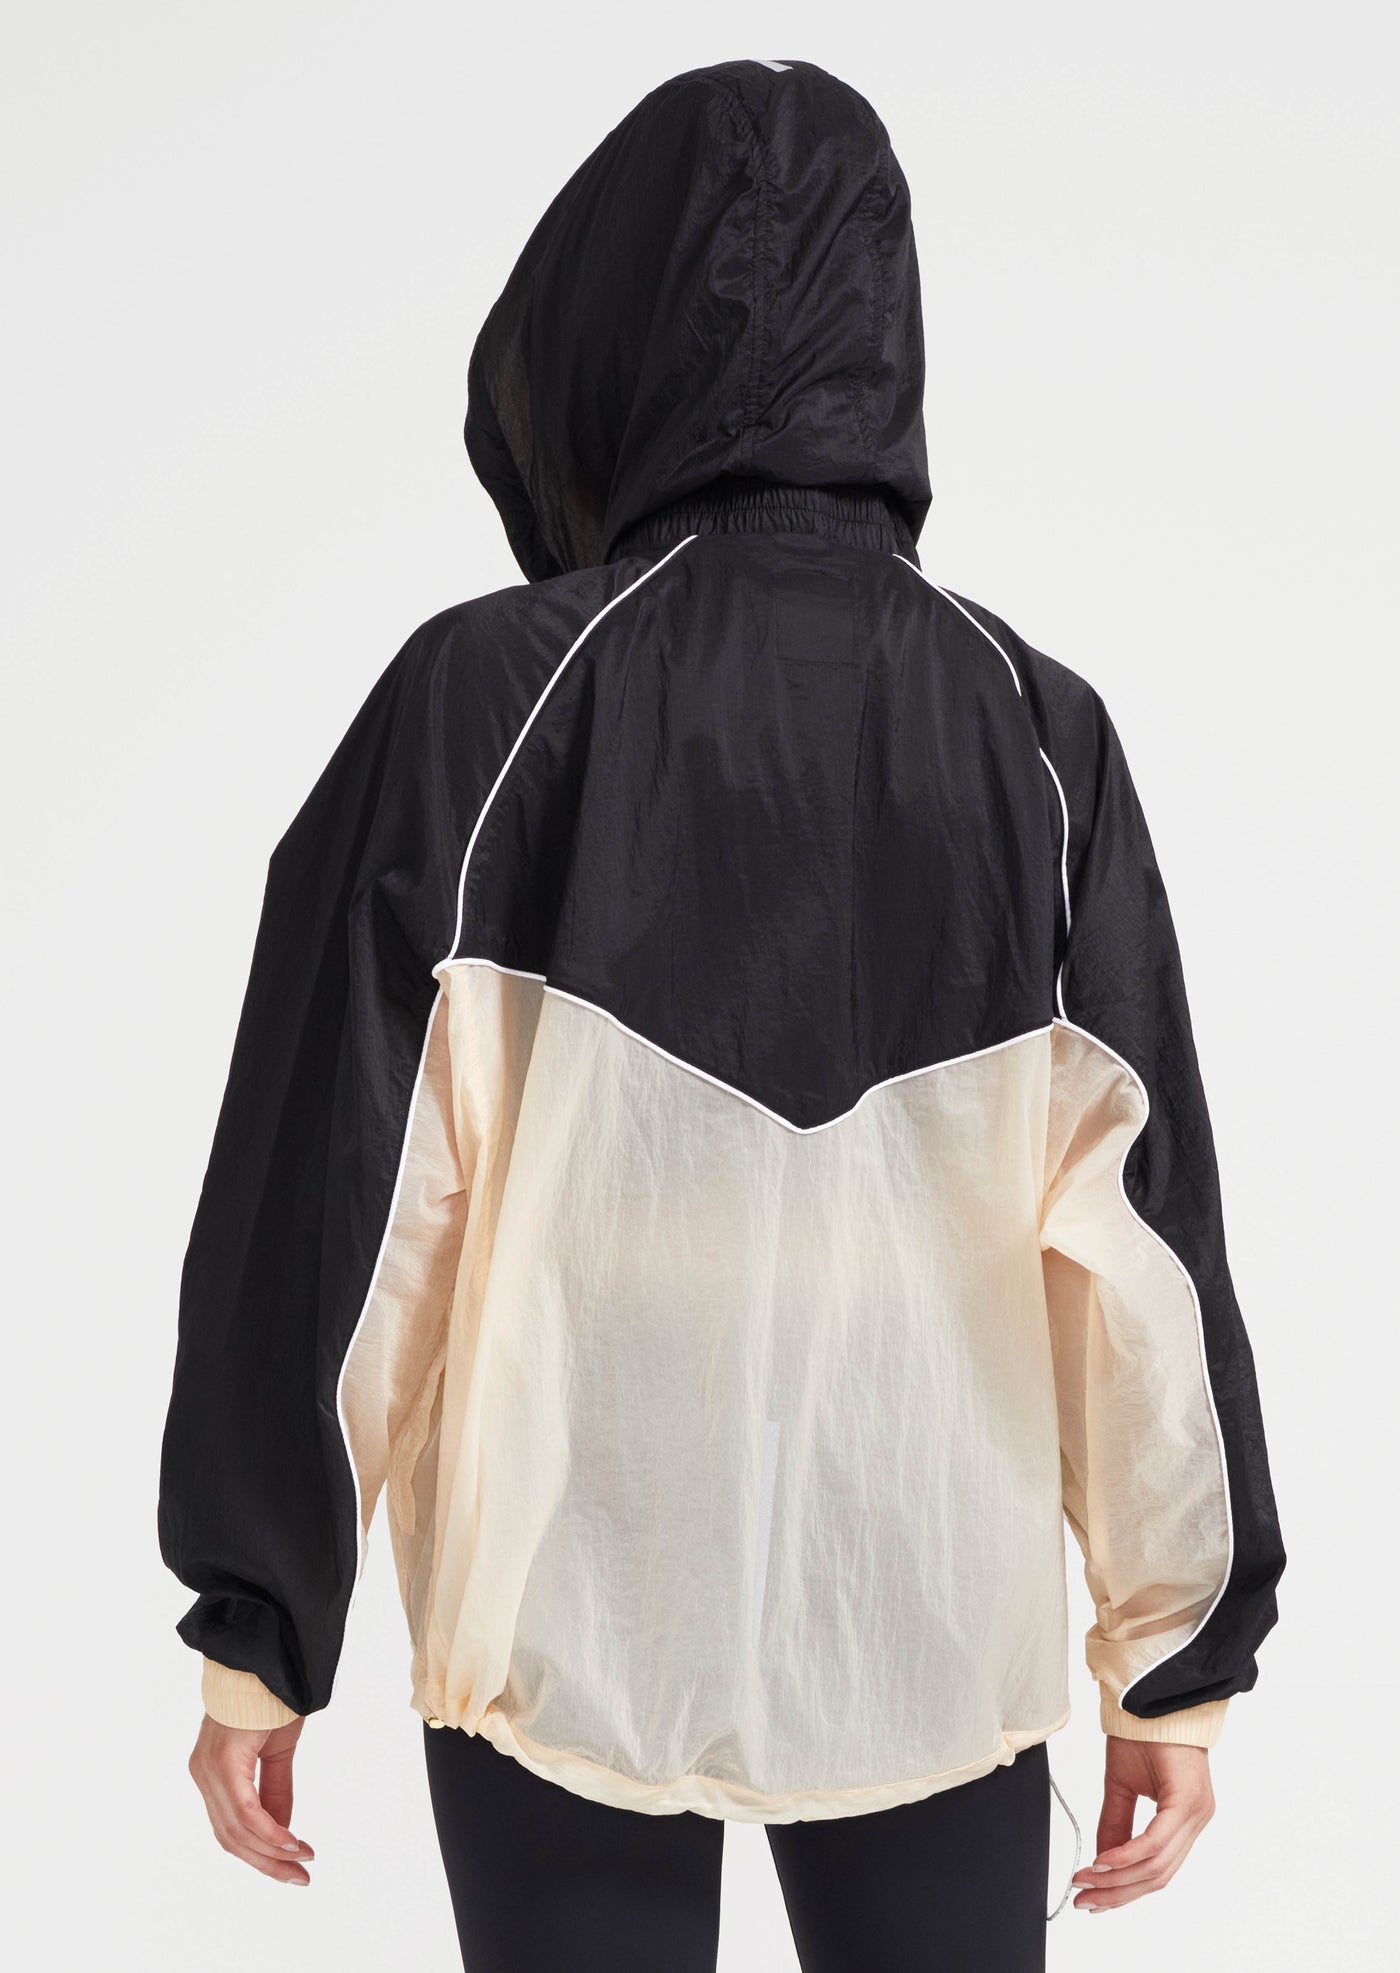 LINE POINT JACKET IN BLACK AND IVORY